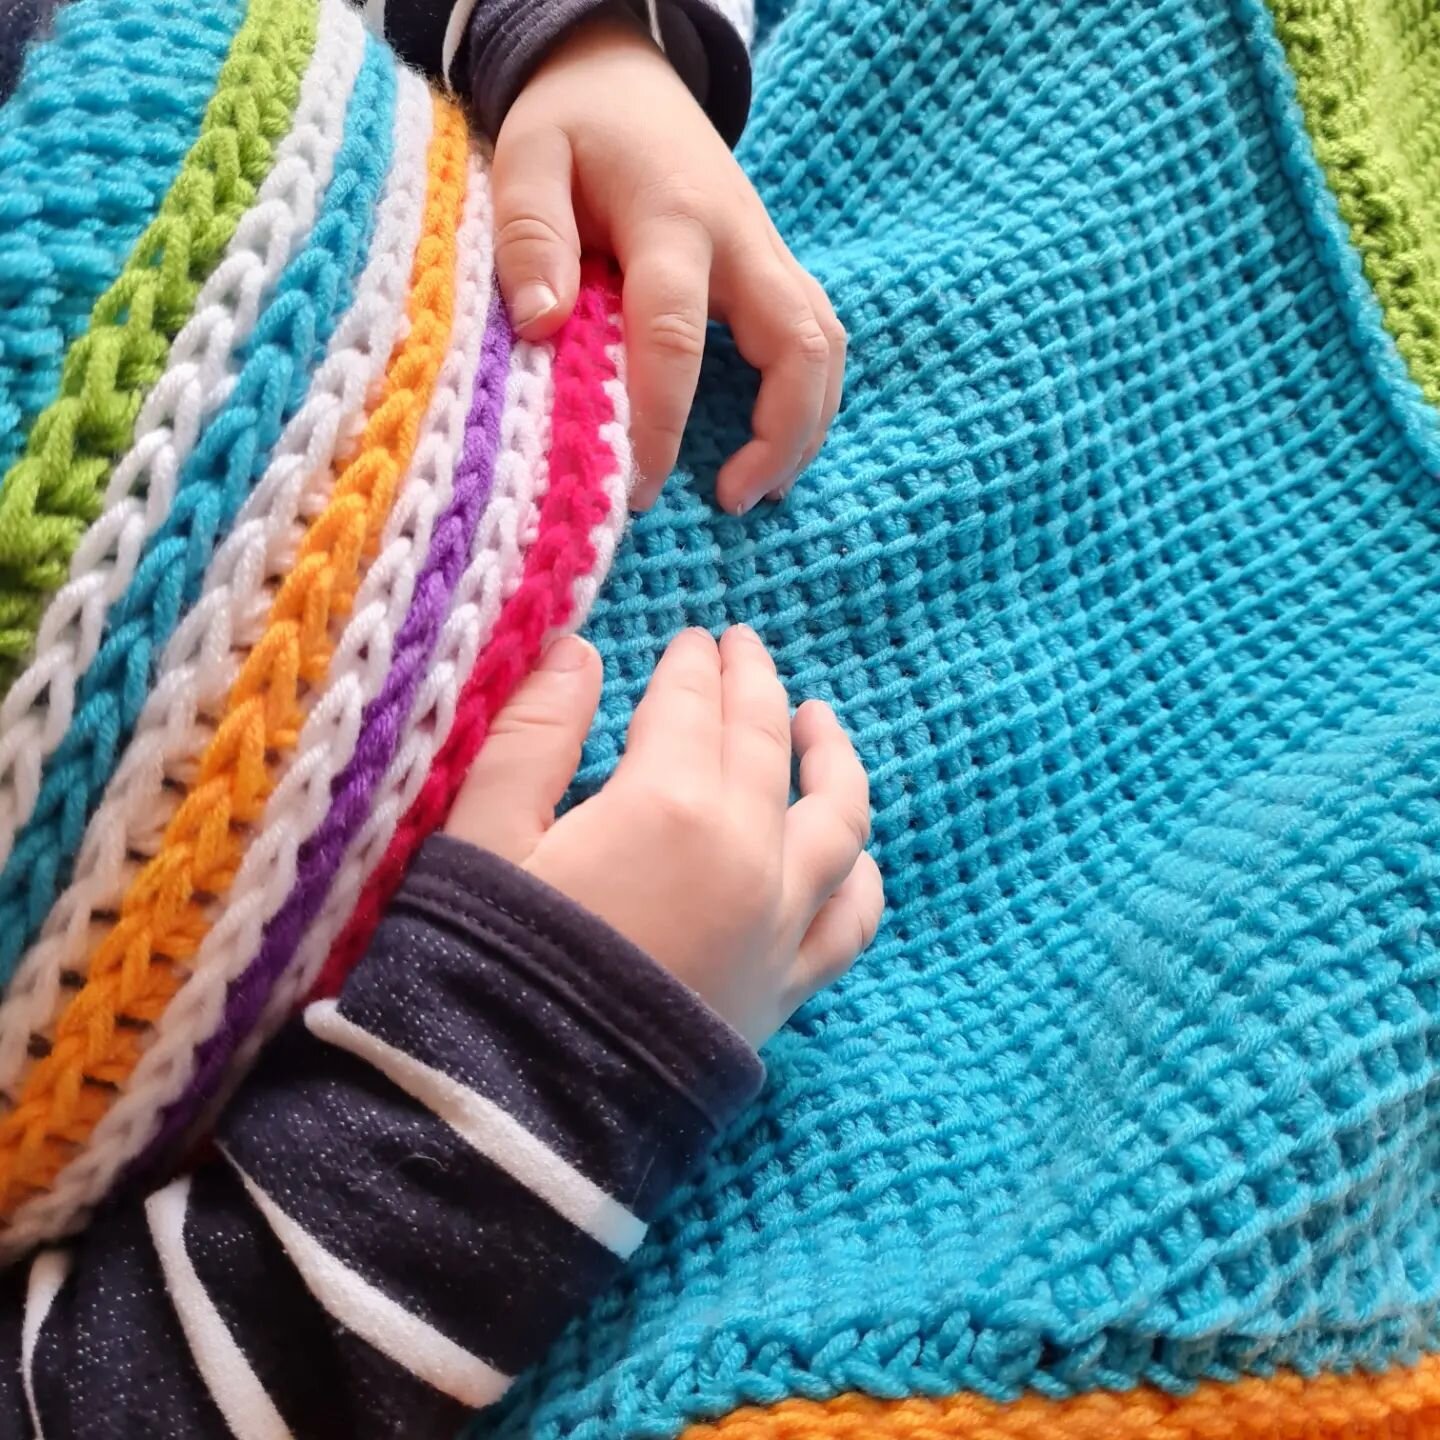 Chubby toddler hands 🥰😍 and warm snuggly blankets I poured love into make my heart happy...
👉 to melt your heart with this little man... just nothing better on a cold, wet day, am I right?!?

#katemadeit #katemadecrochet #mumlife #mumlifeaustralia